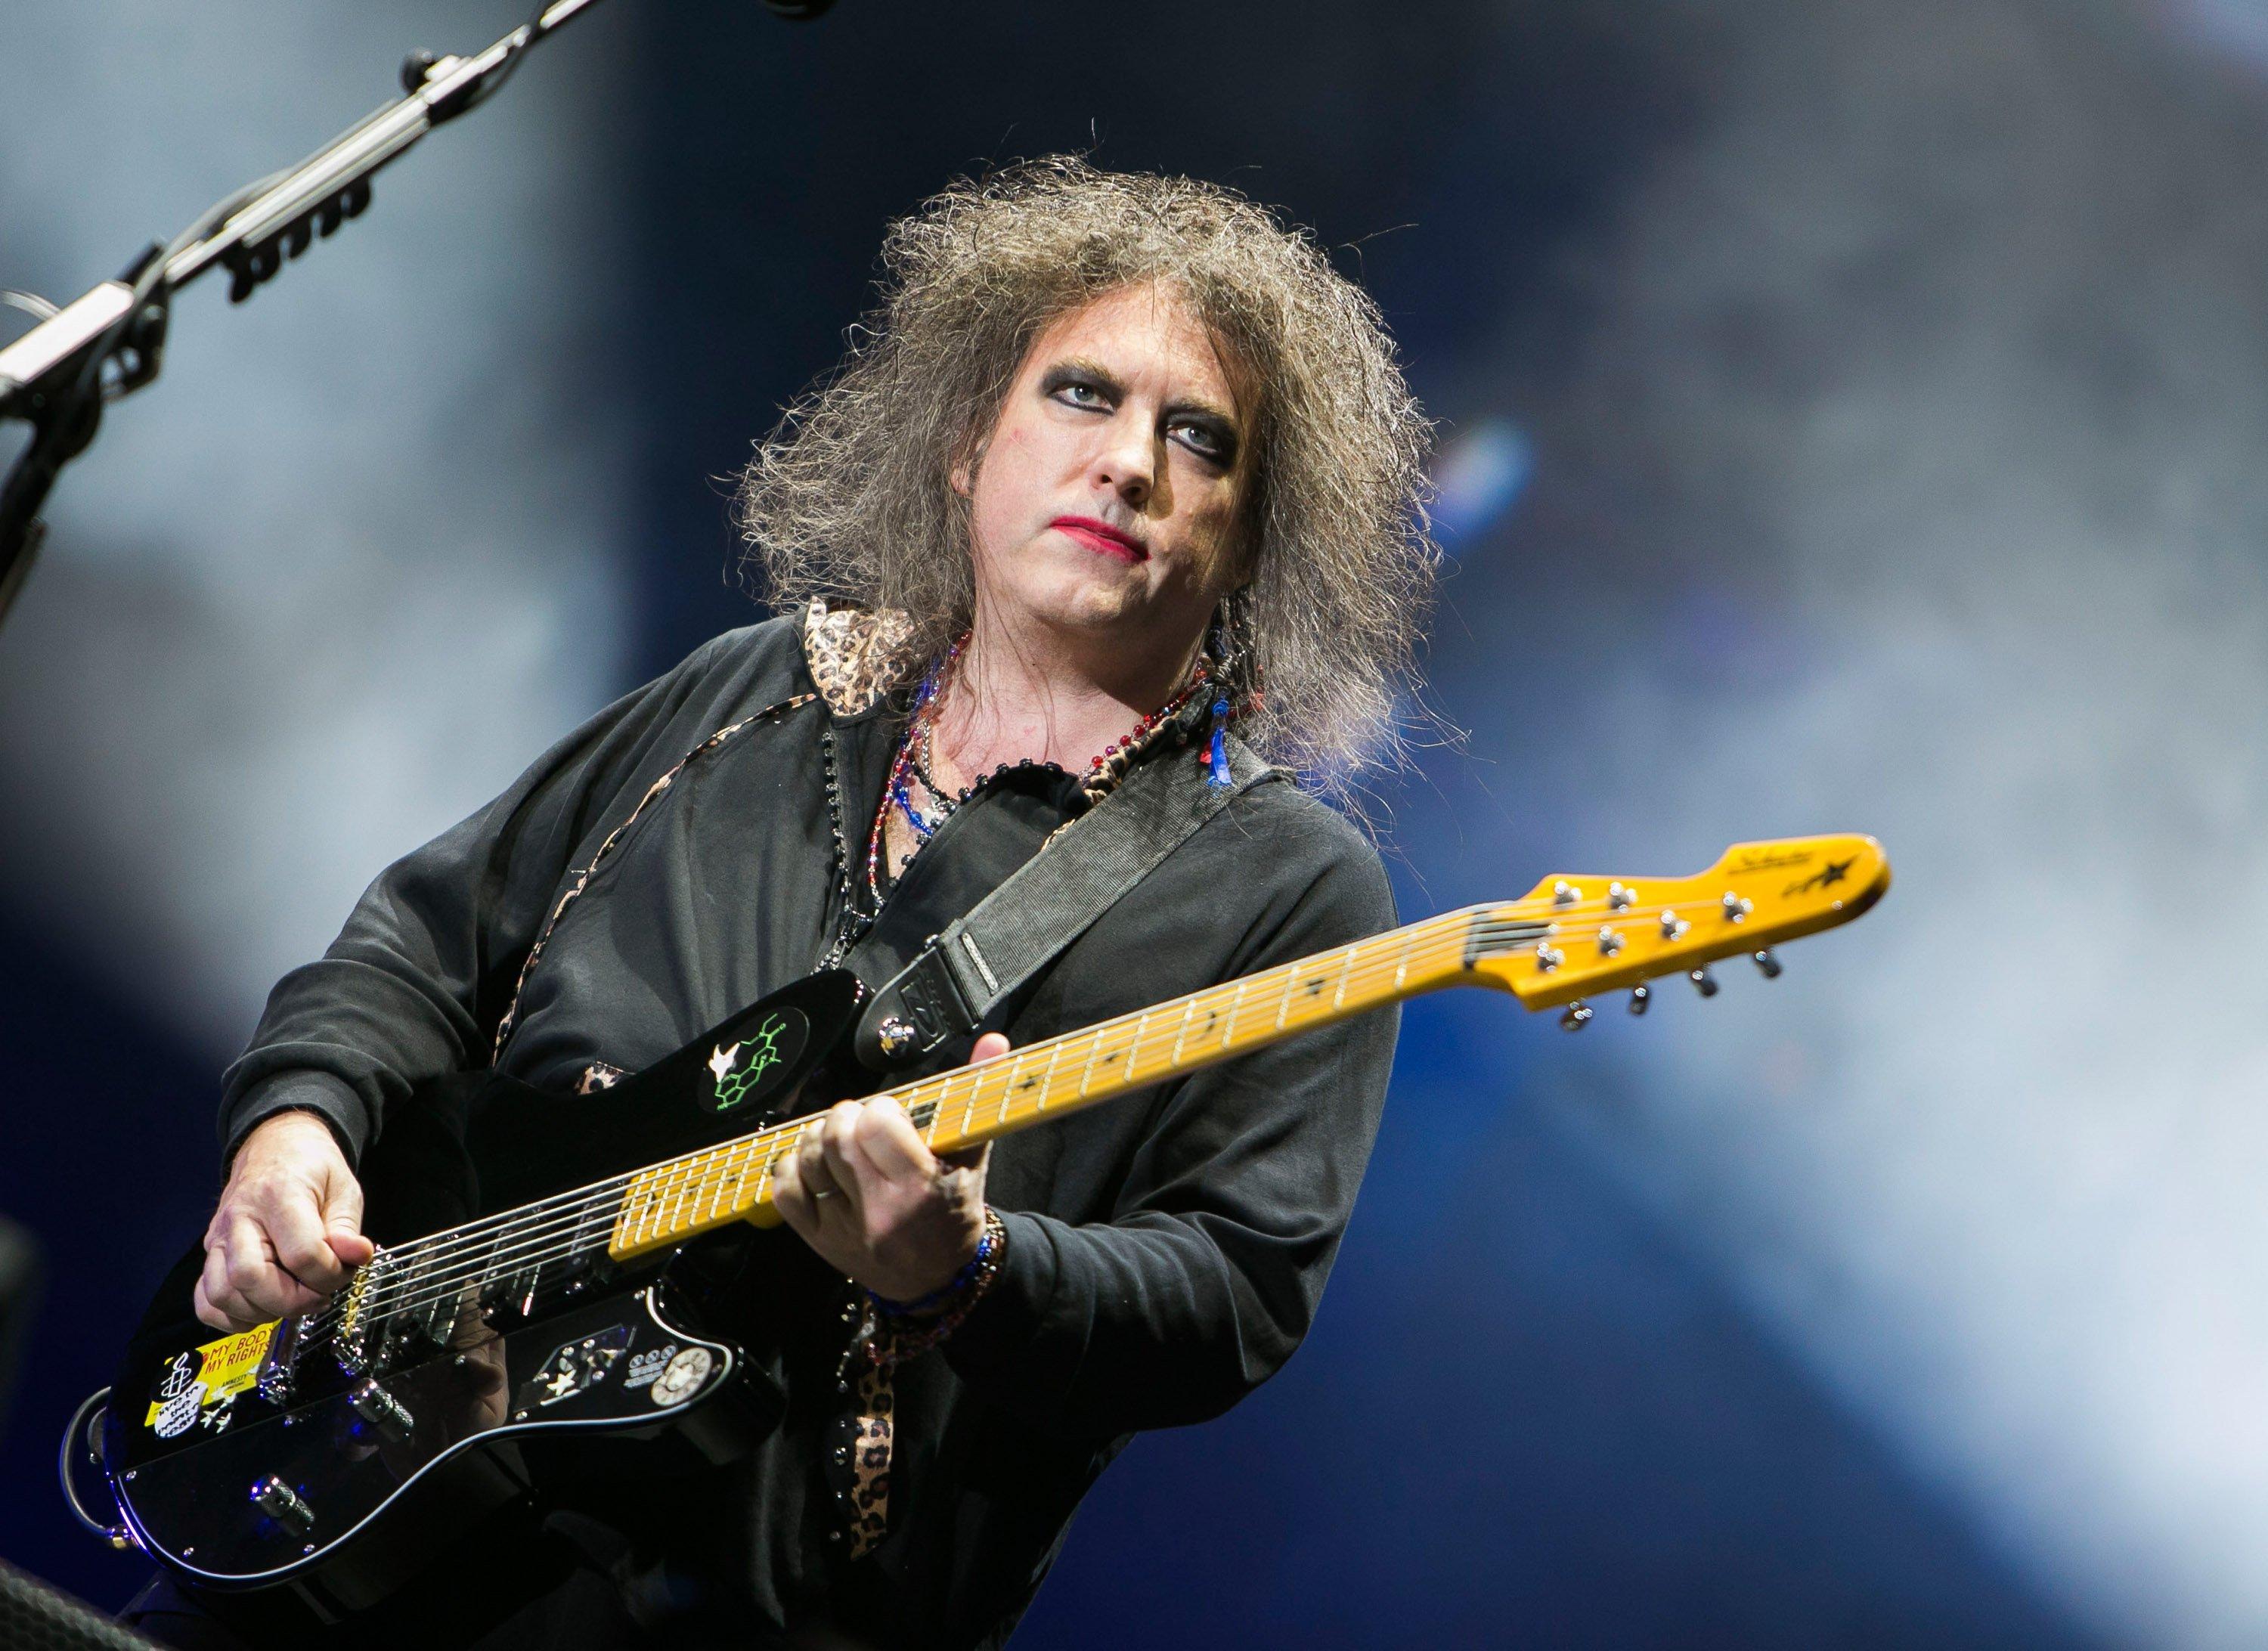 Robert Smith of the Cure on stage